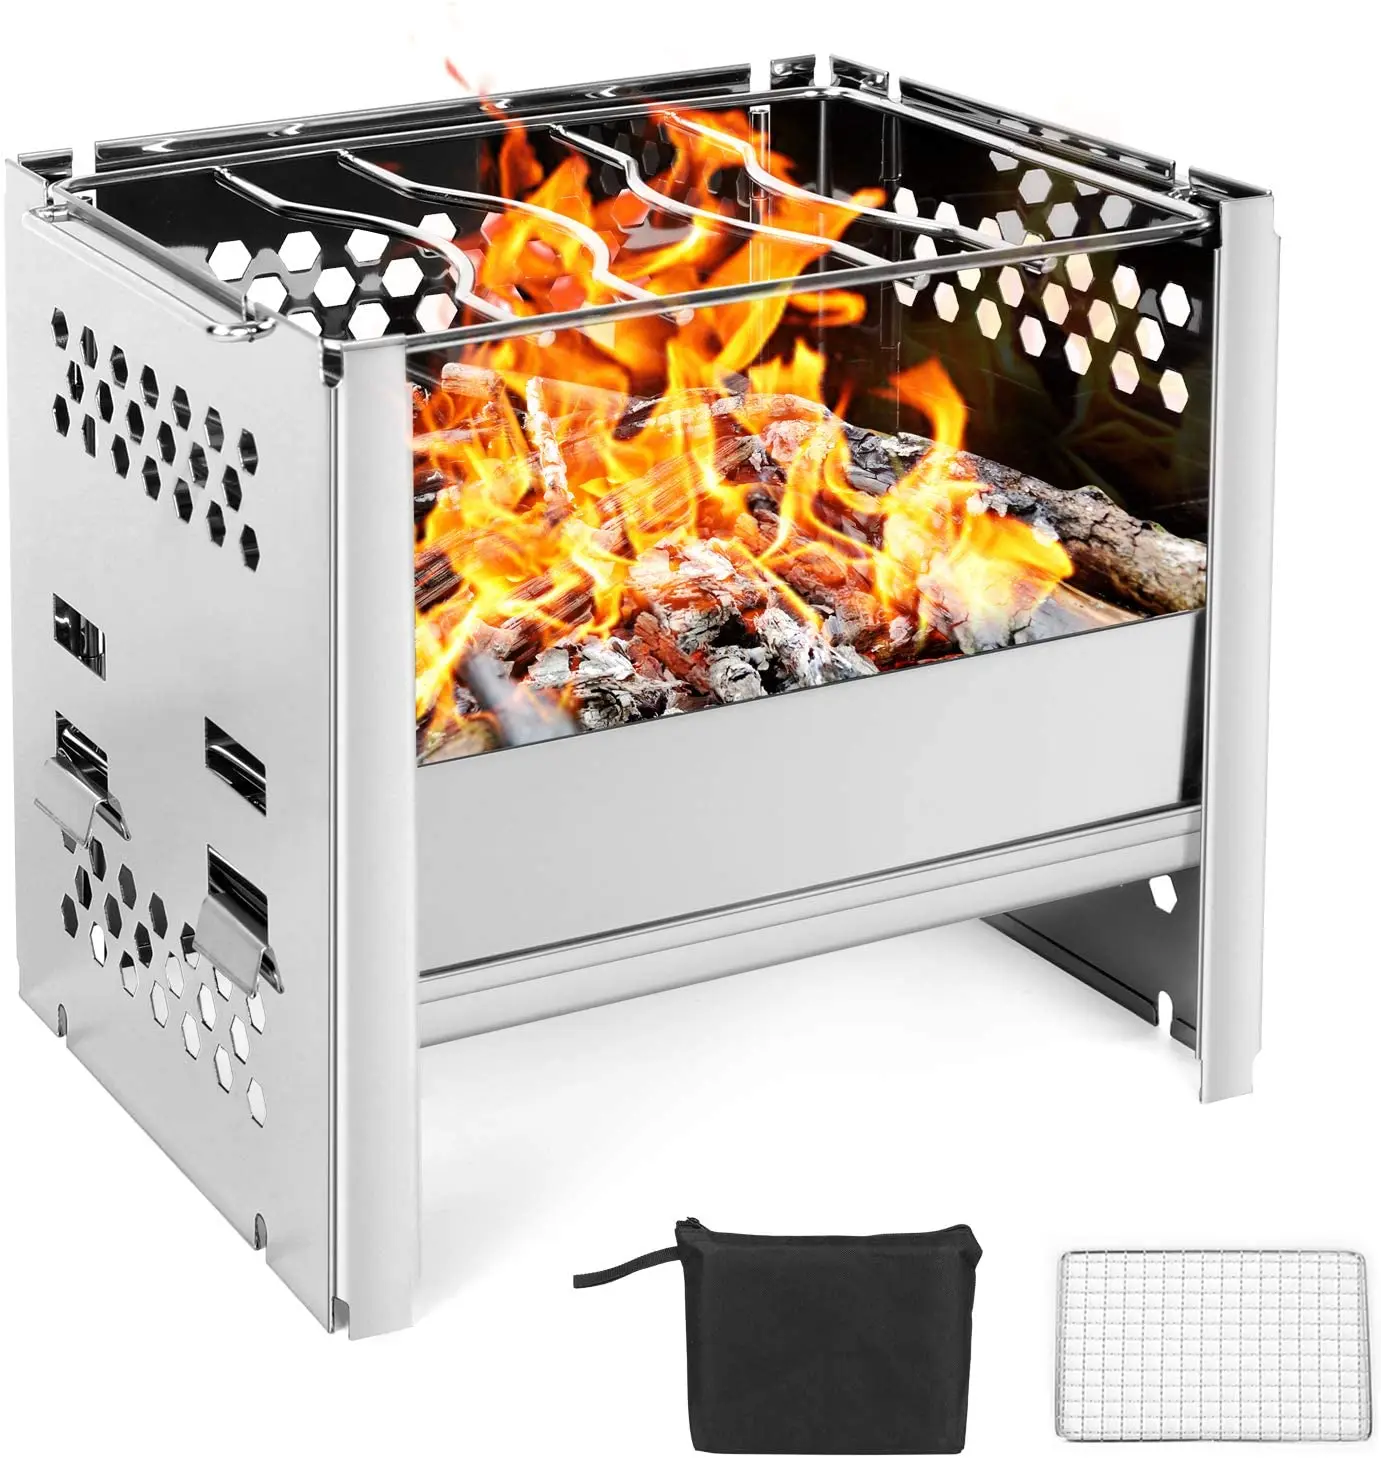 

Grill Grid Stainless Steel Backpacking Stove Potable Wood Burning Stoves for Picnic BBQ Camp Hiking with camping stove, Silver